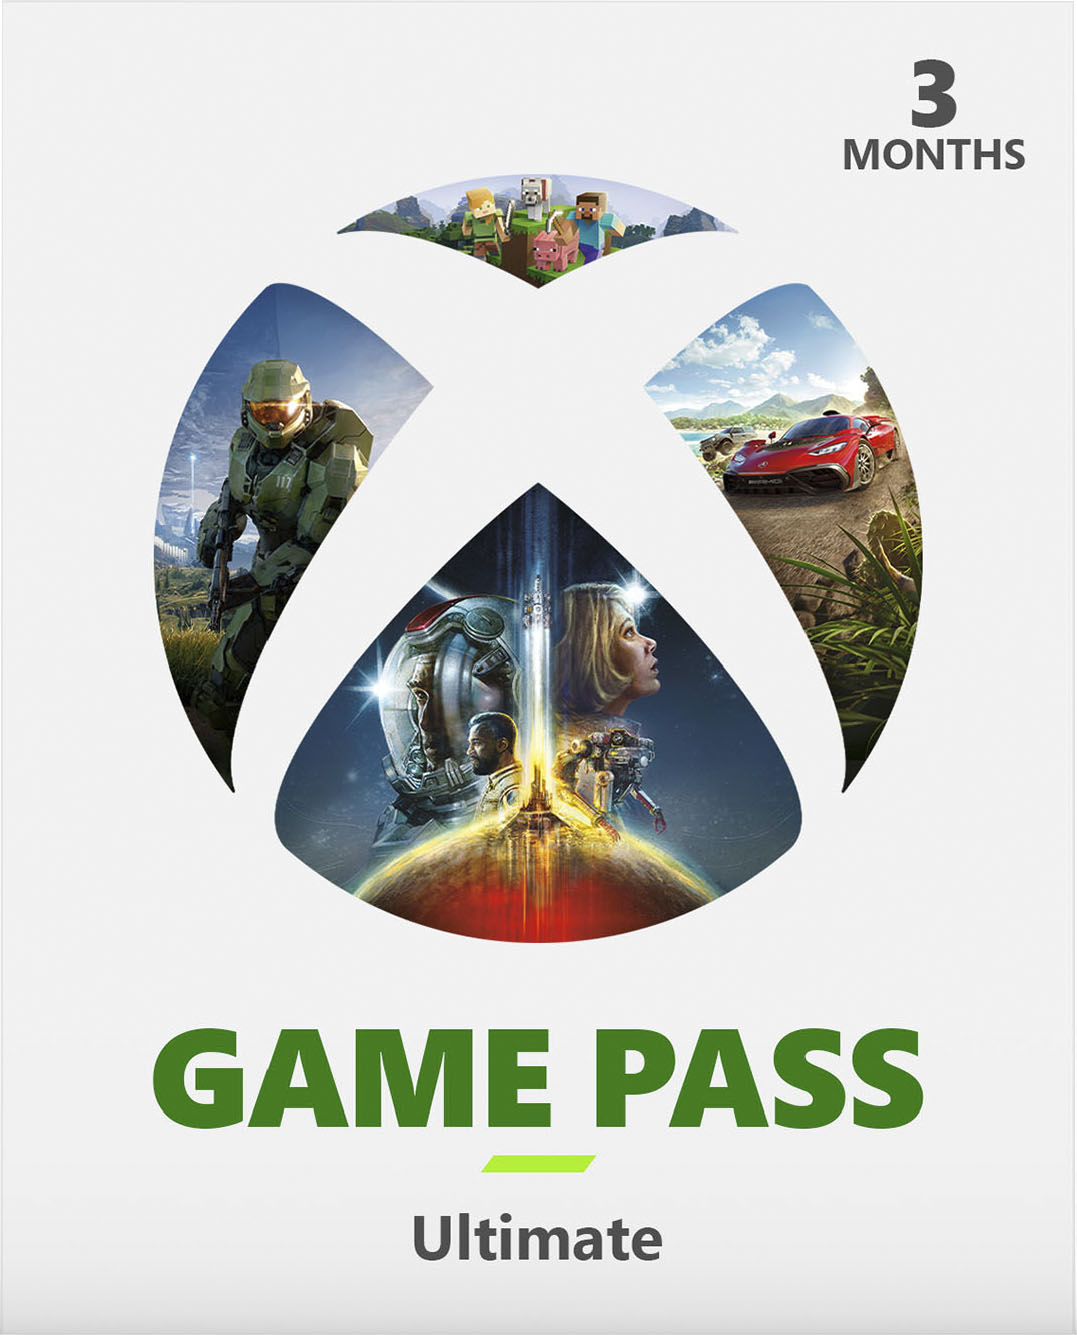 High on Life Shows The True Power of Xbox Game Pass